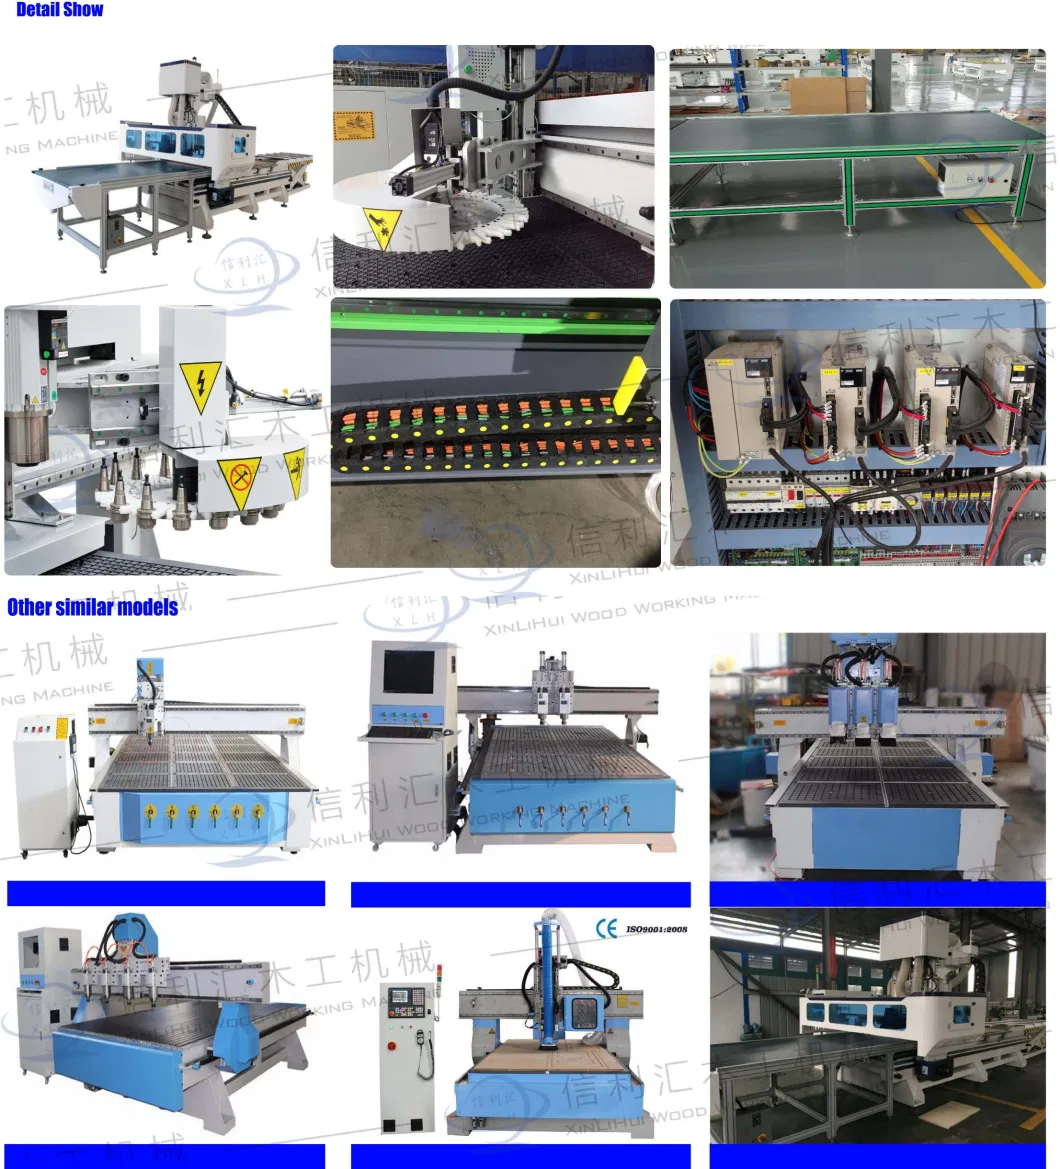 Manufacturer Slant Bed Horizontal Automatic Economic Heavy Duty 4 Axis Wood Cutting Turning Milling Drilling CNC Lathe Machine 6 -Axes 3D CNC Machine